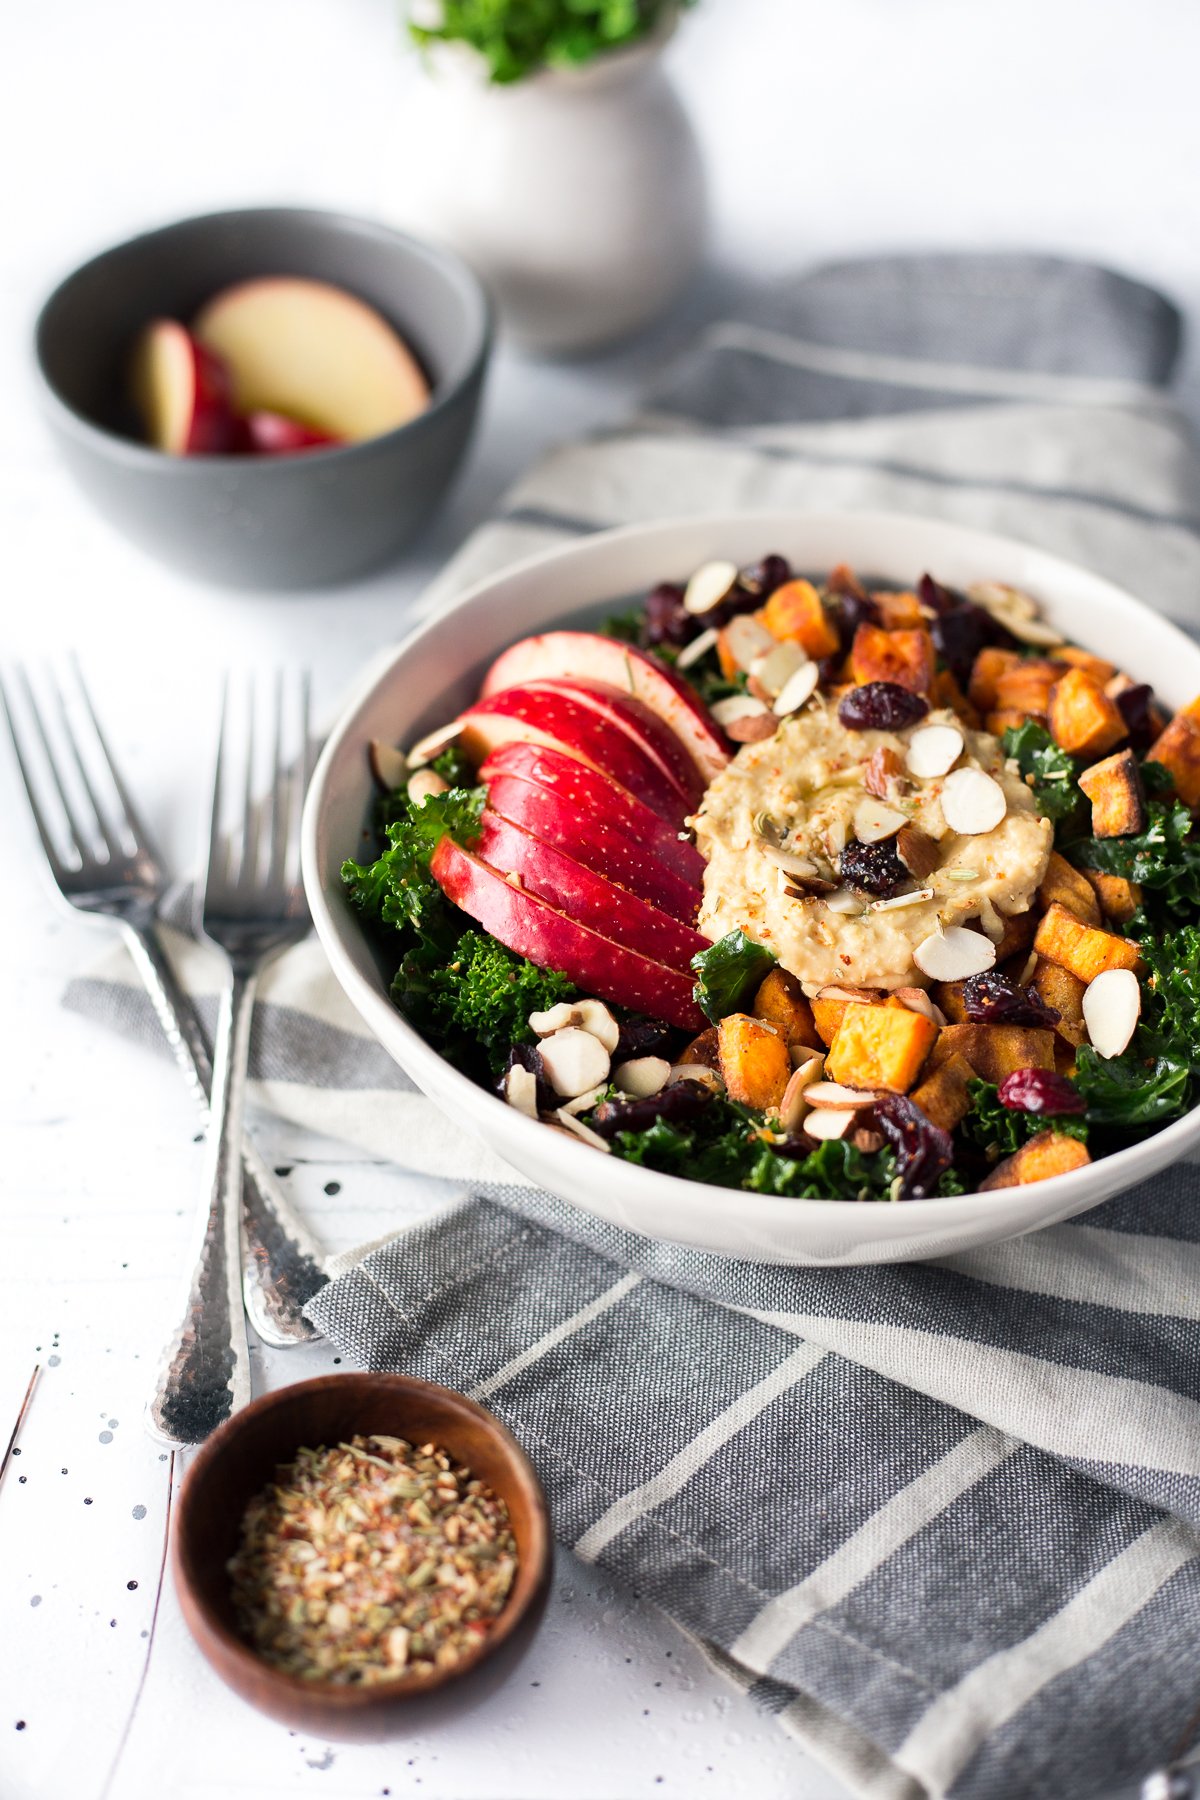 If you're in need of a hummus recipe easy enough to whip together in 30 minutes, then look no further than this amazing Winter Hummus Bowl with roasted sweet potatoes, apples, and kale. | asimplepantry.com